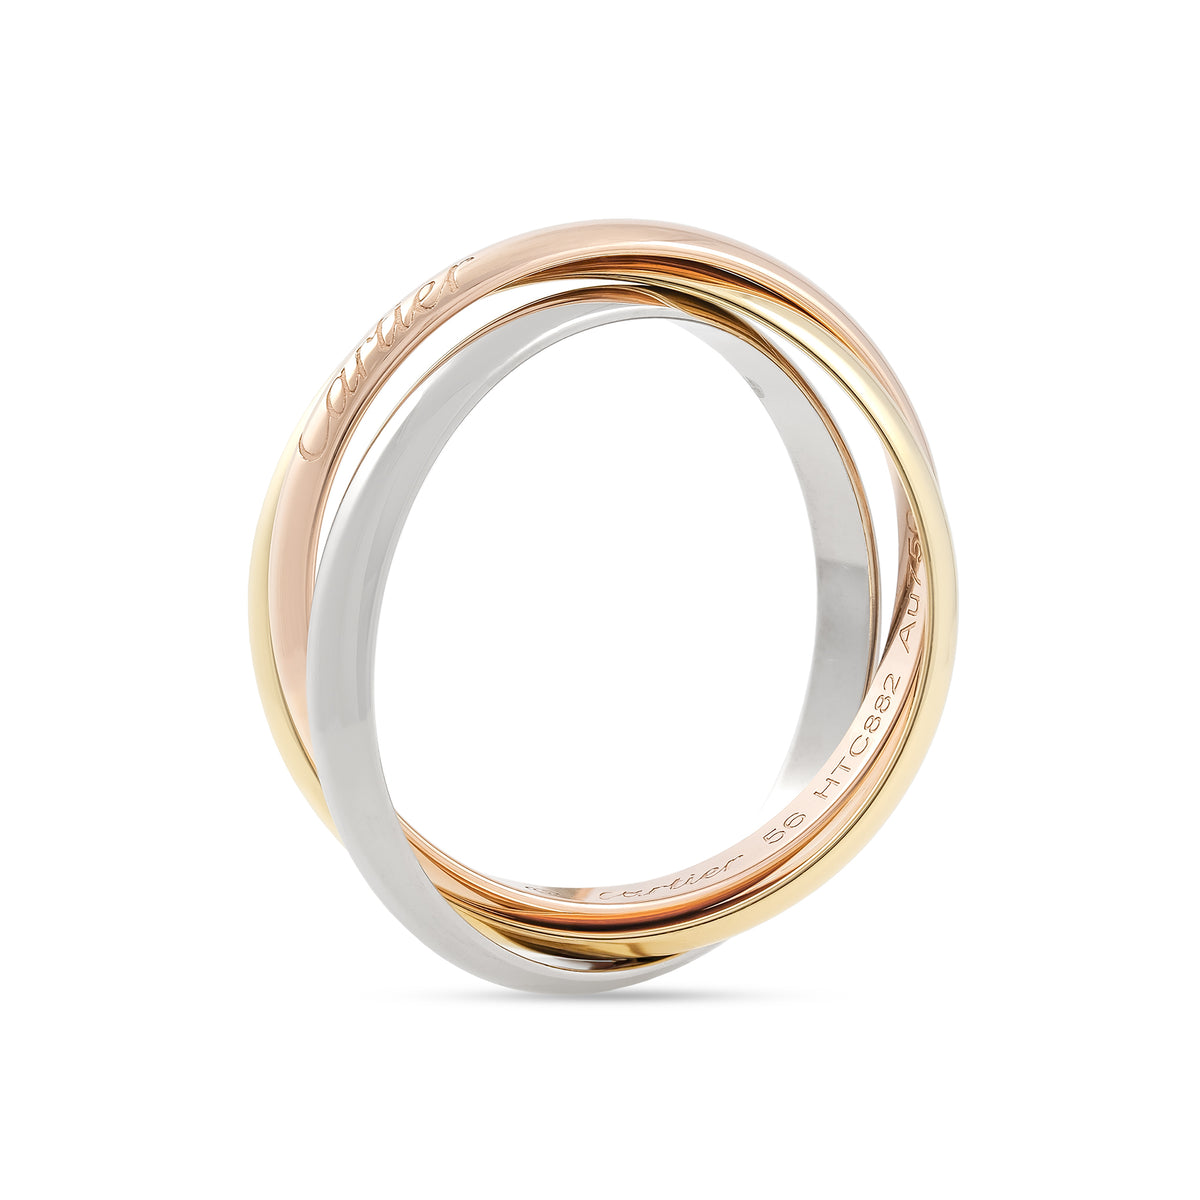 Cartier 18ct Gold Trinity Ring